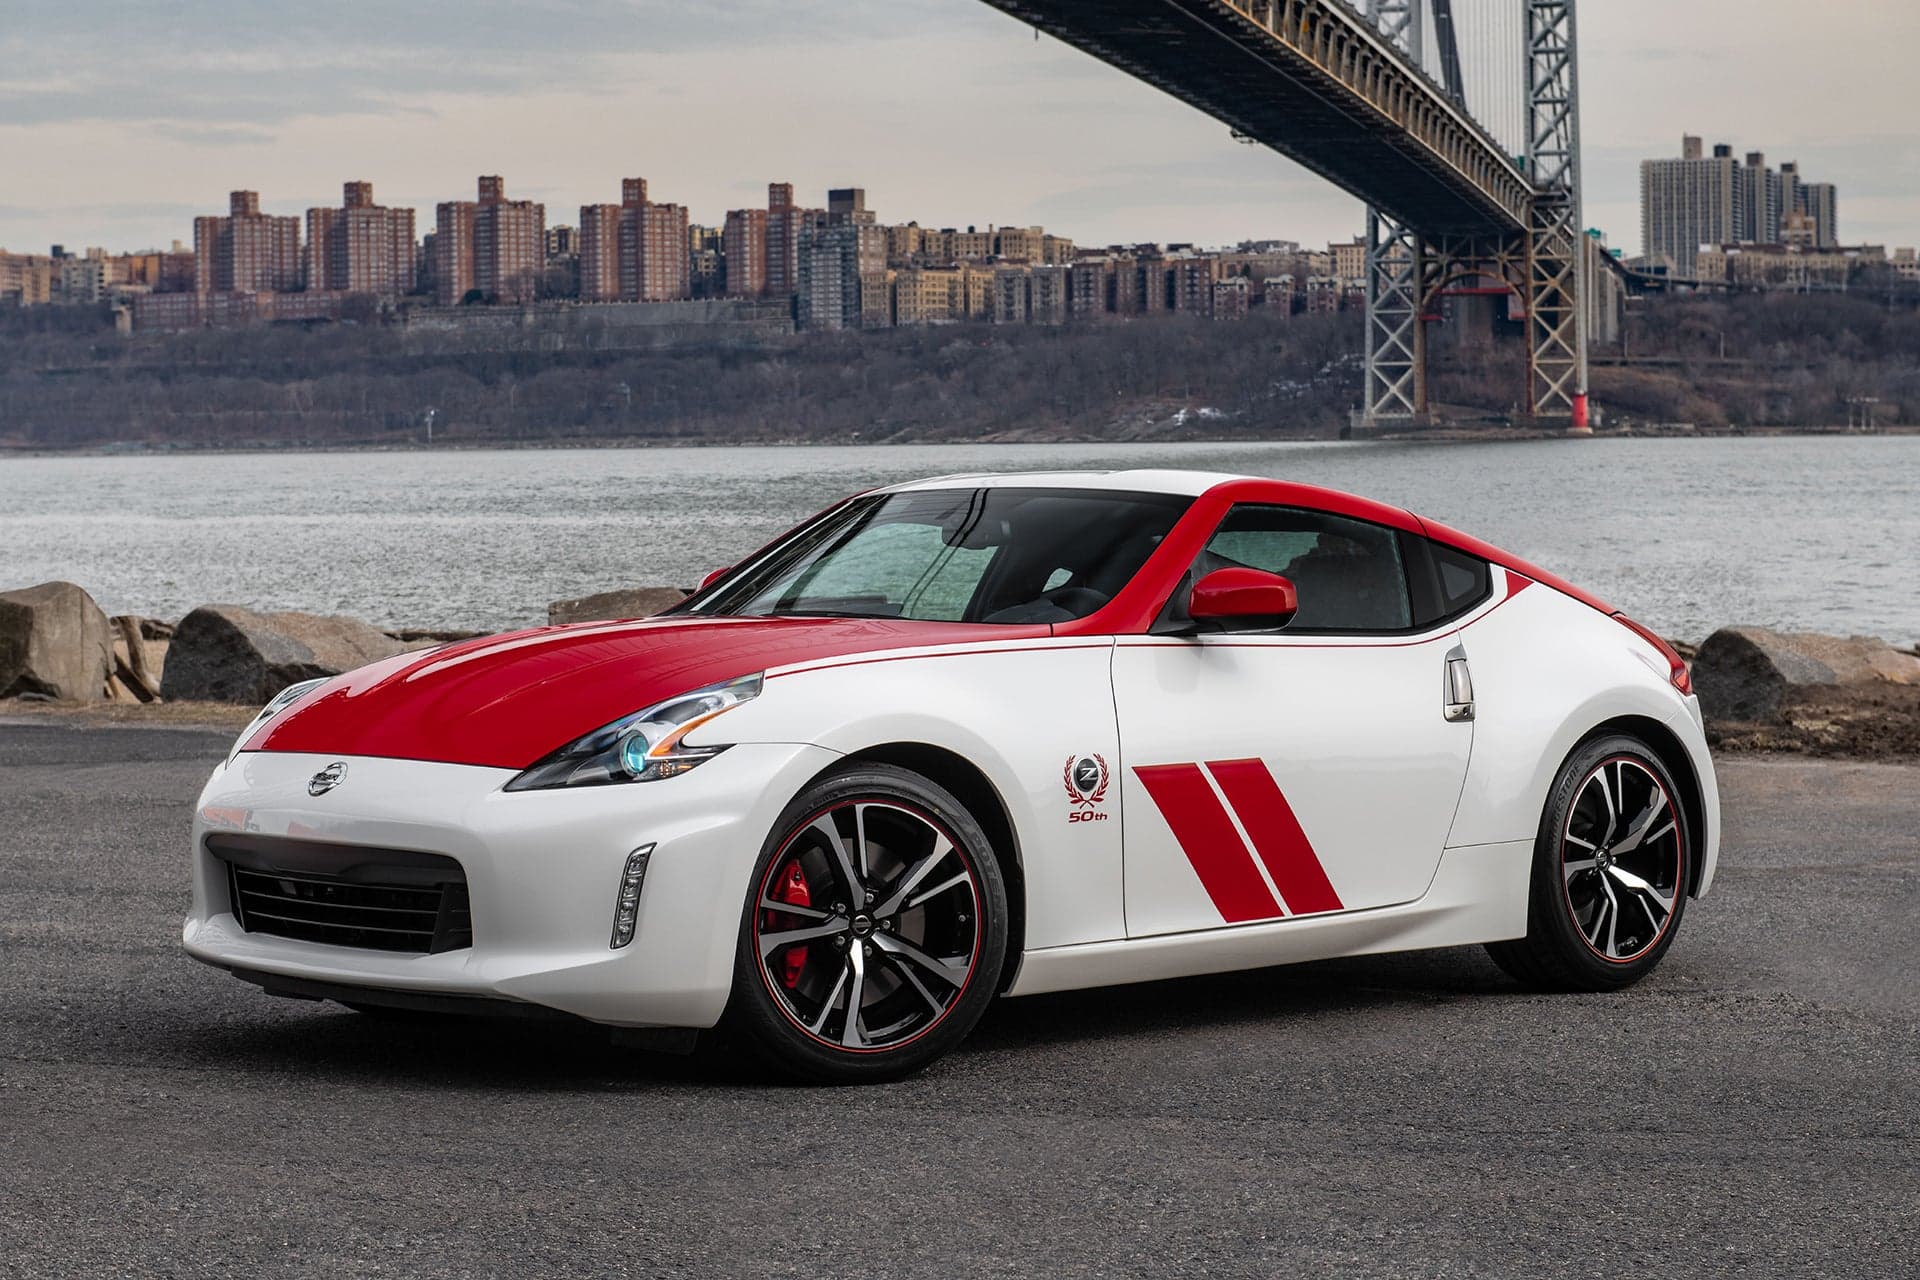 2020 370Z 50th Anniversary Edition: Honoring Half a Century of Japanese Sports Cars